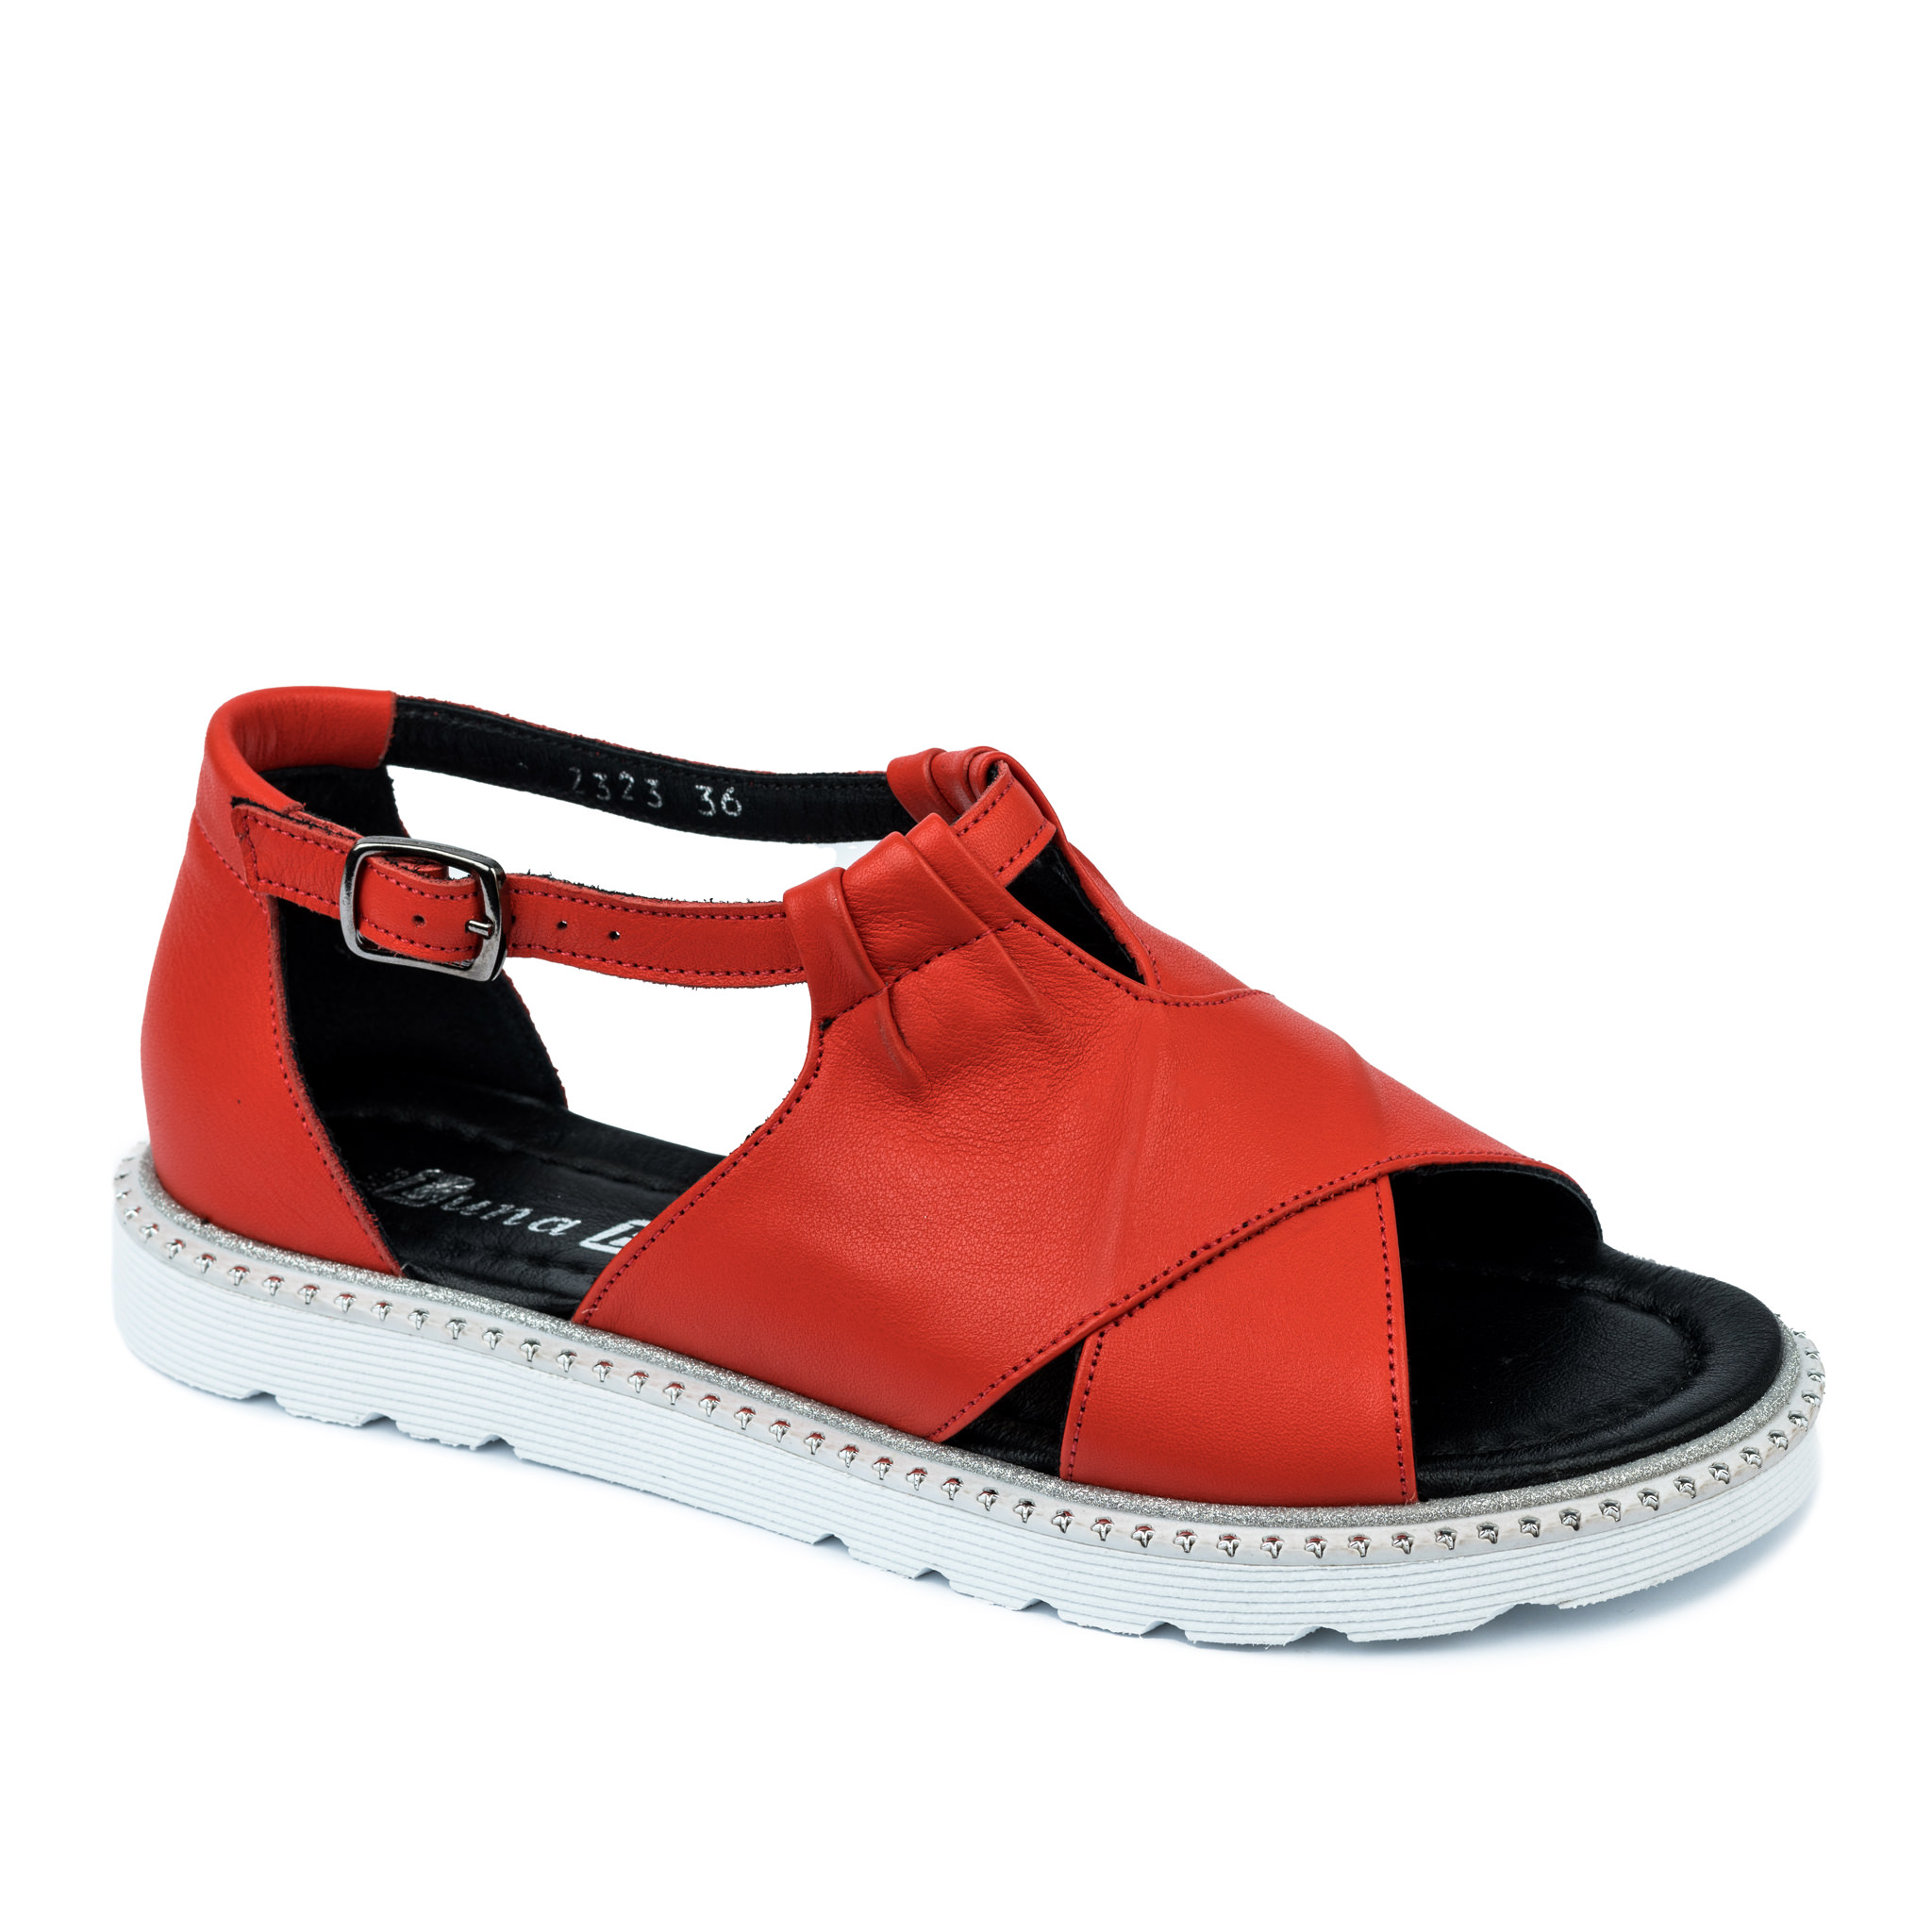 Leather sandals A650 - RED